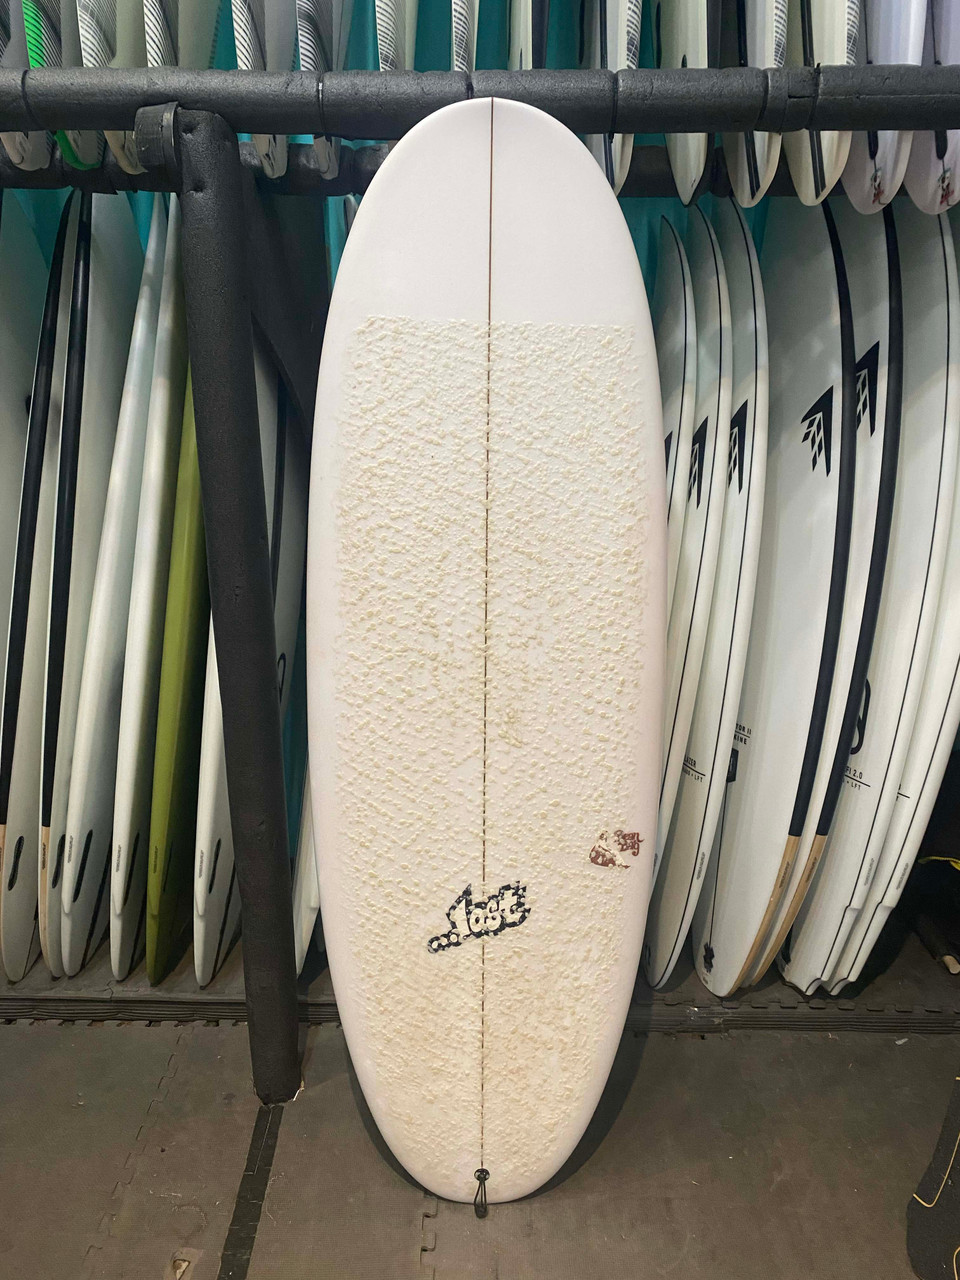 5'8 LOST BEAN BAG USED SURFBOARD- Catalyst